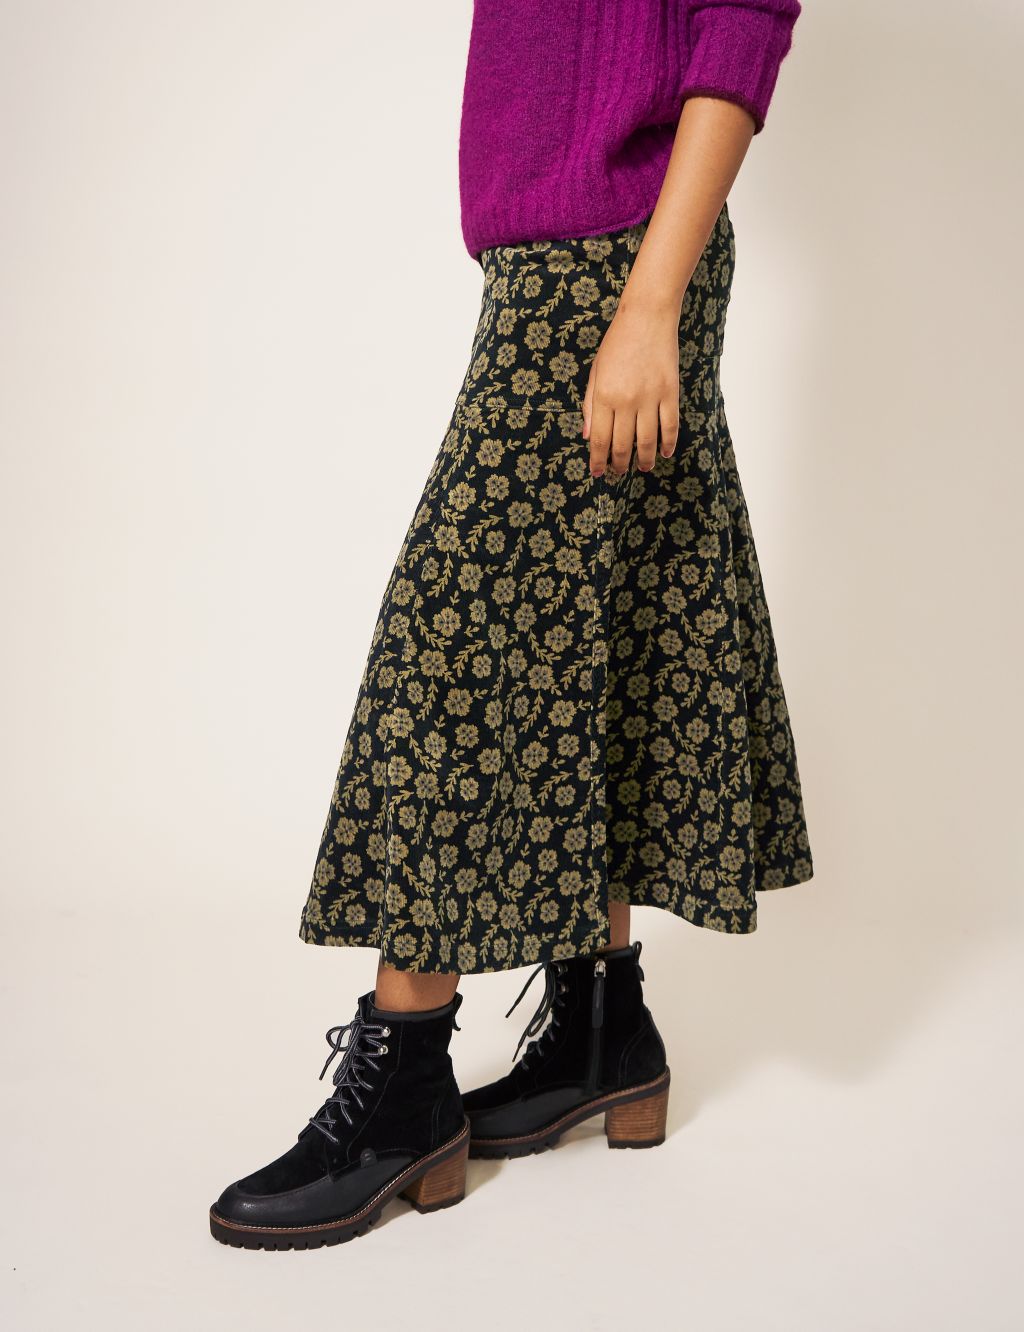 Cord Floral Midaxi A-Line Skirt image 4